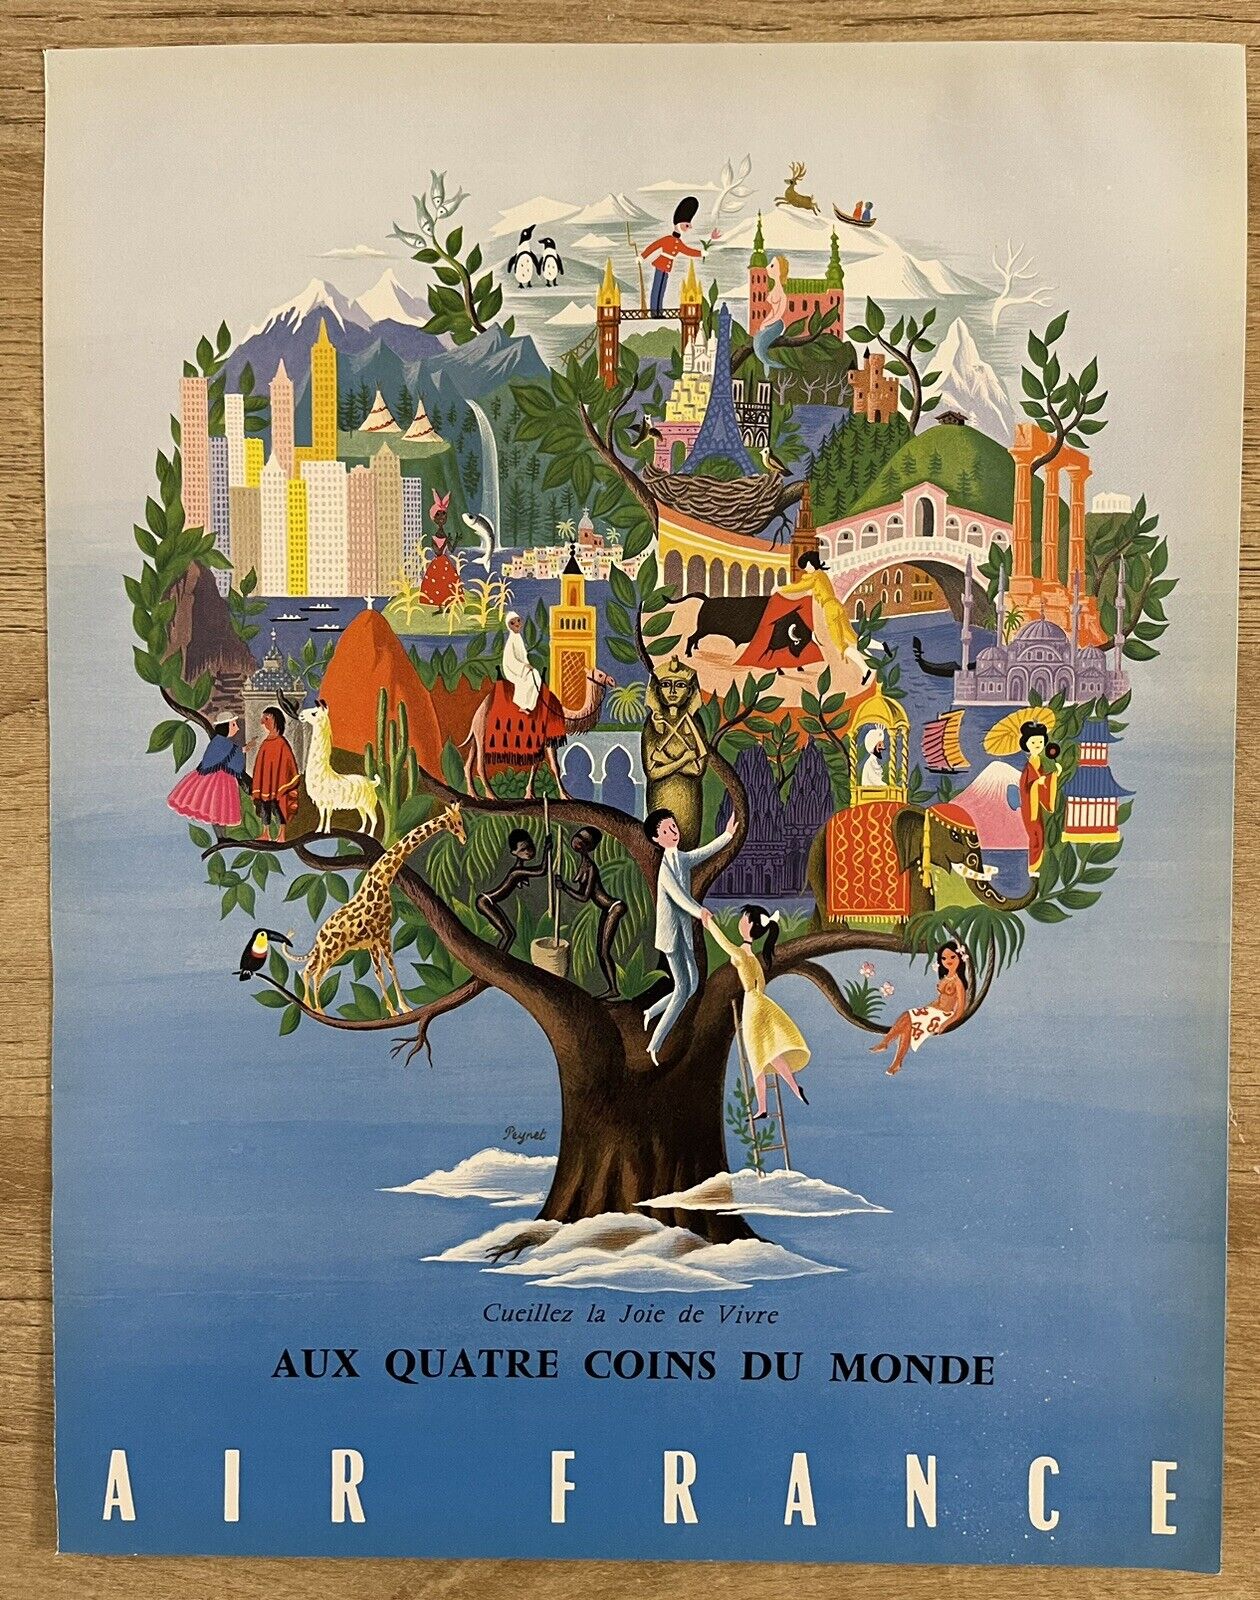 Vintage Print Ad - Air France Airlines - Full Color Advertisement From 1956